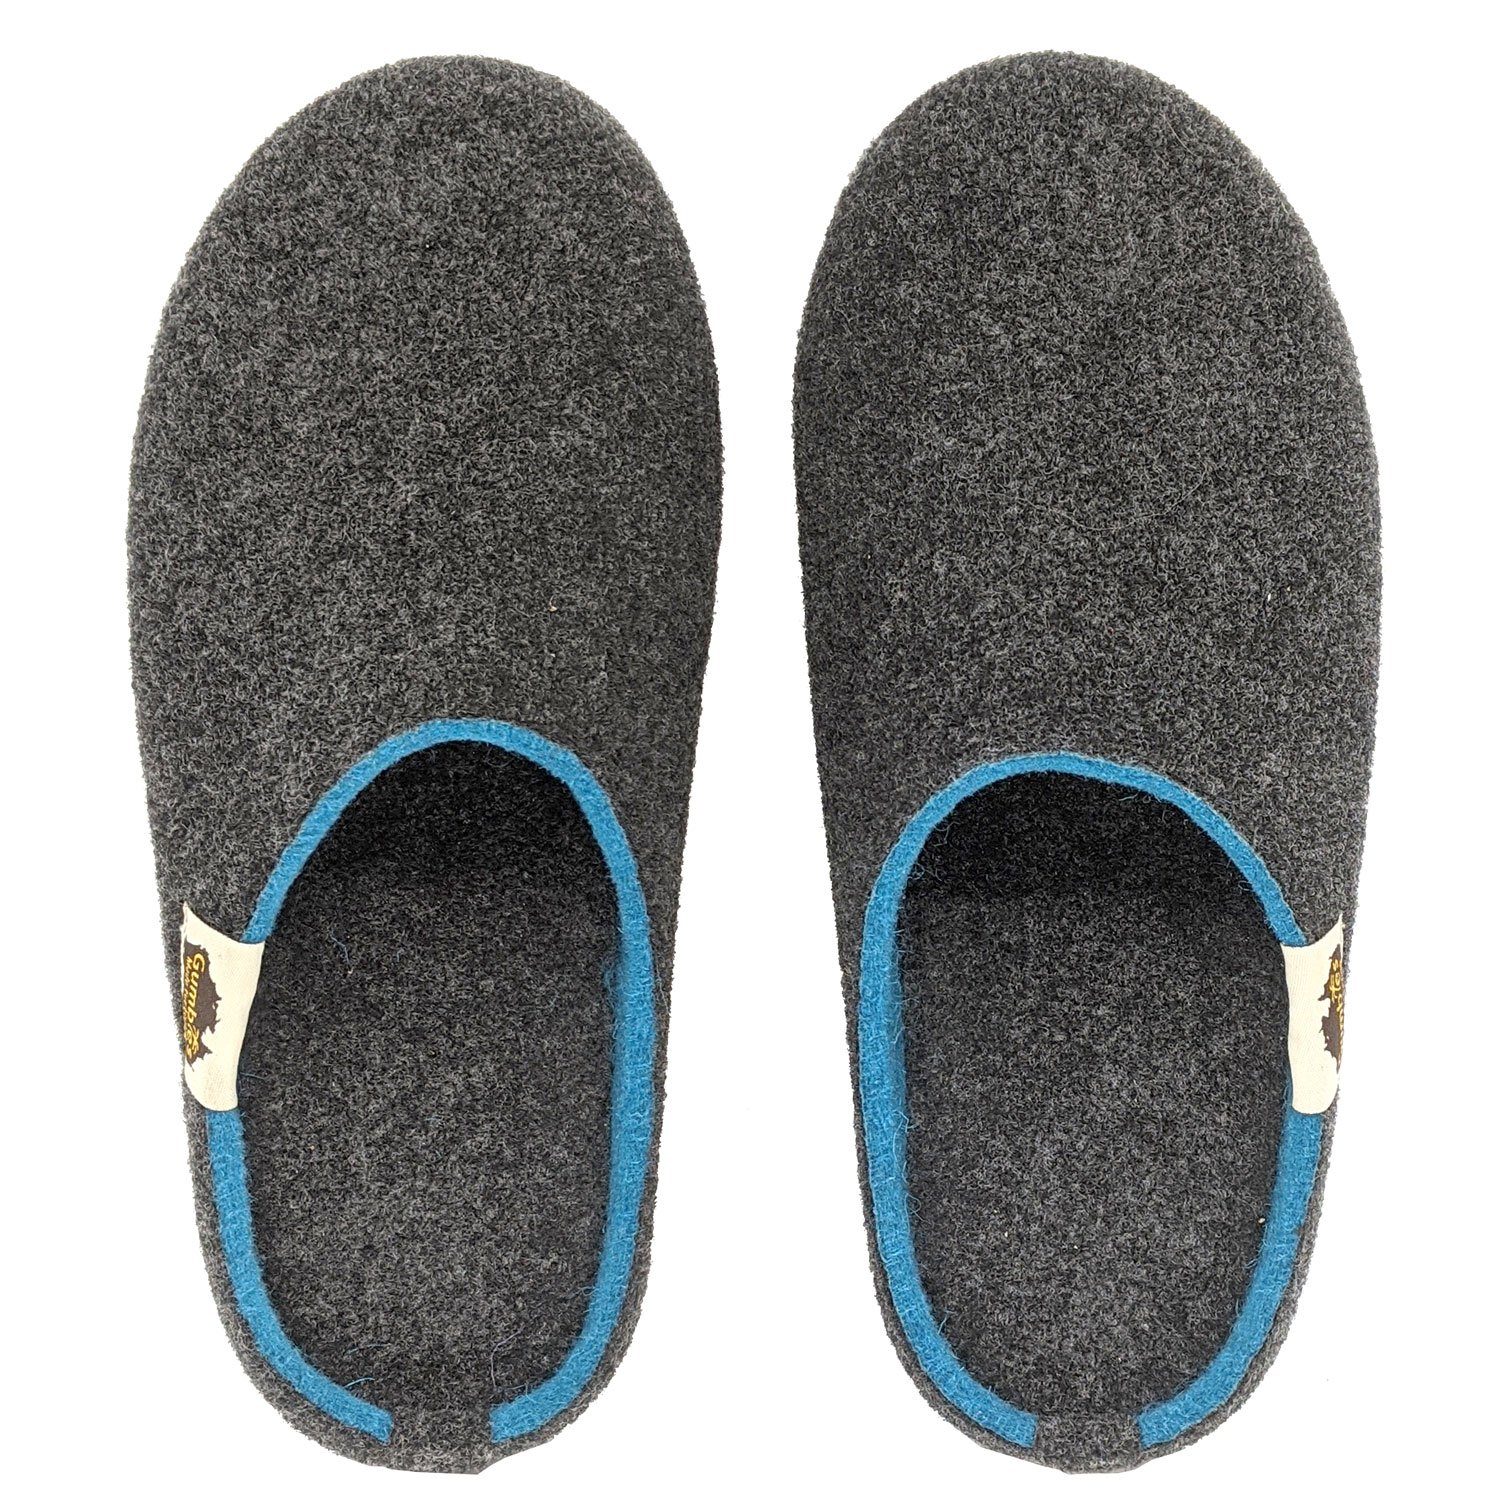 Charcoal charcoal-turquoise aus Gumbies in »in Outback Hausschuh Slipper Materialien farbenfrohen recycelten Turquoise Designs«